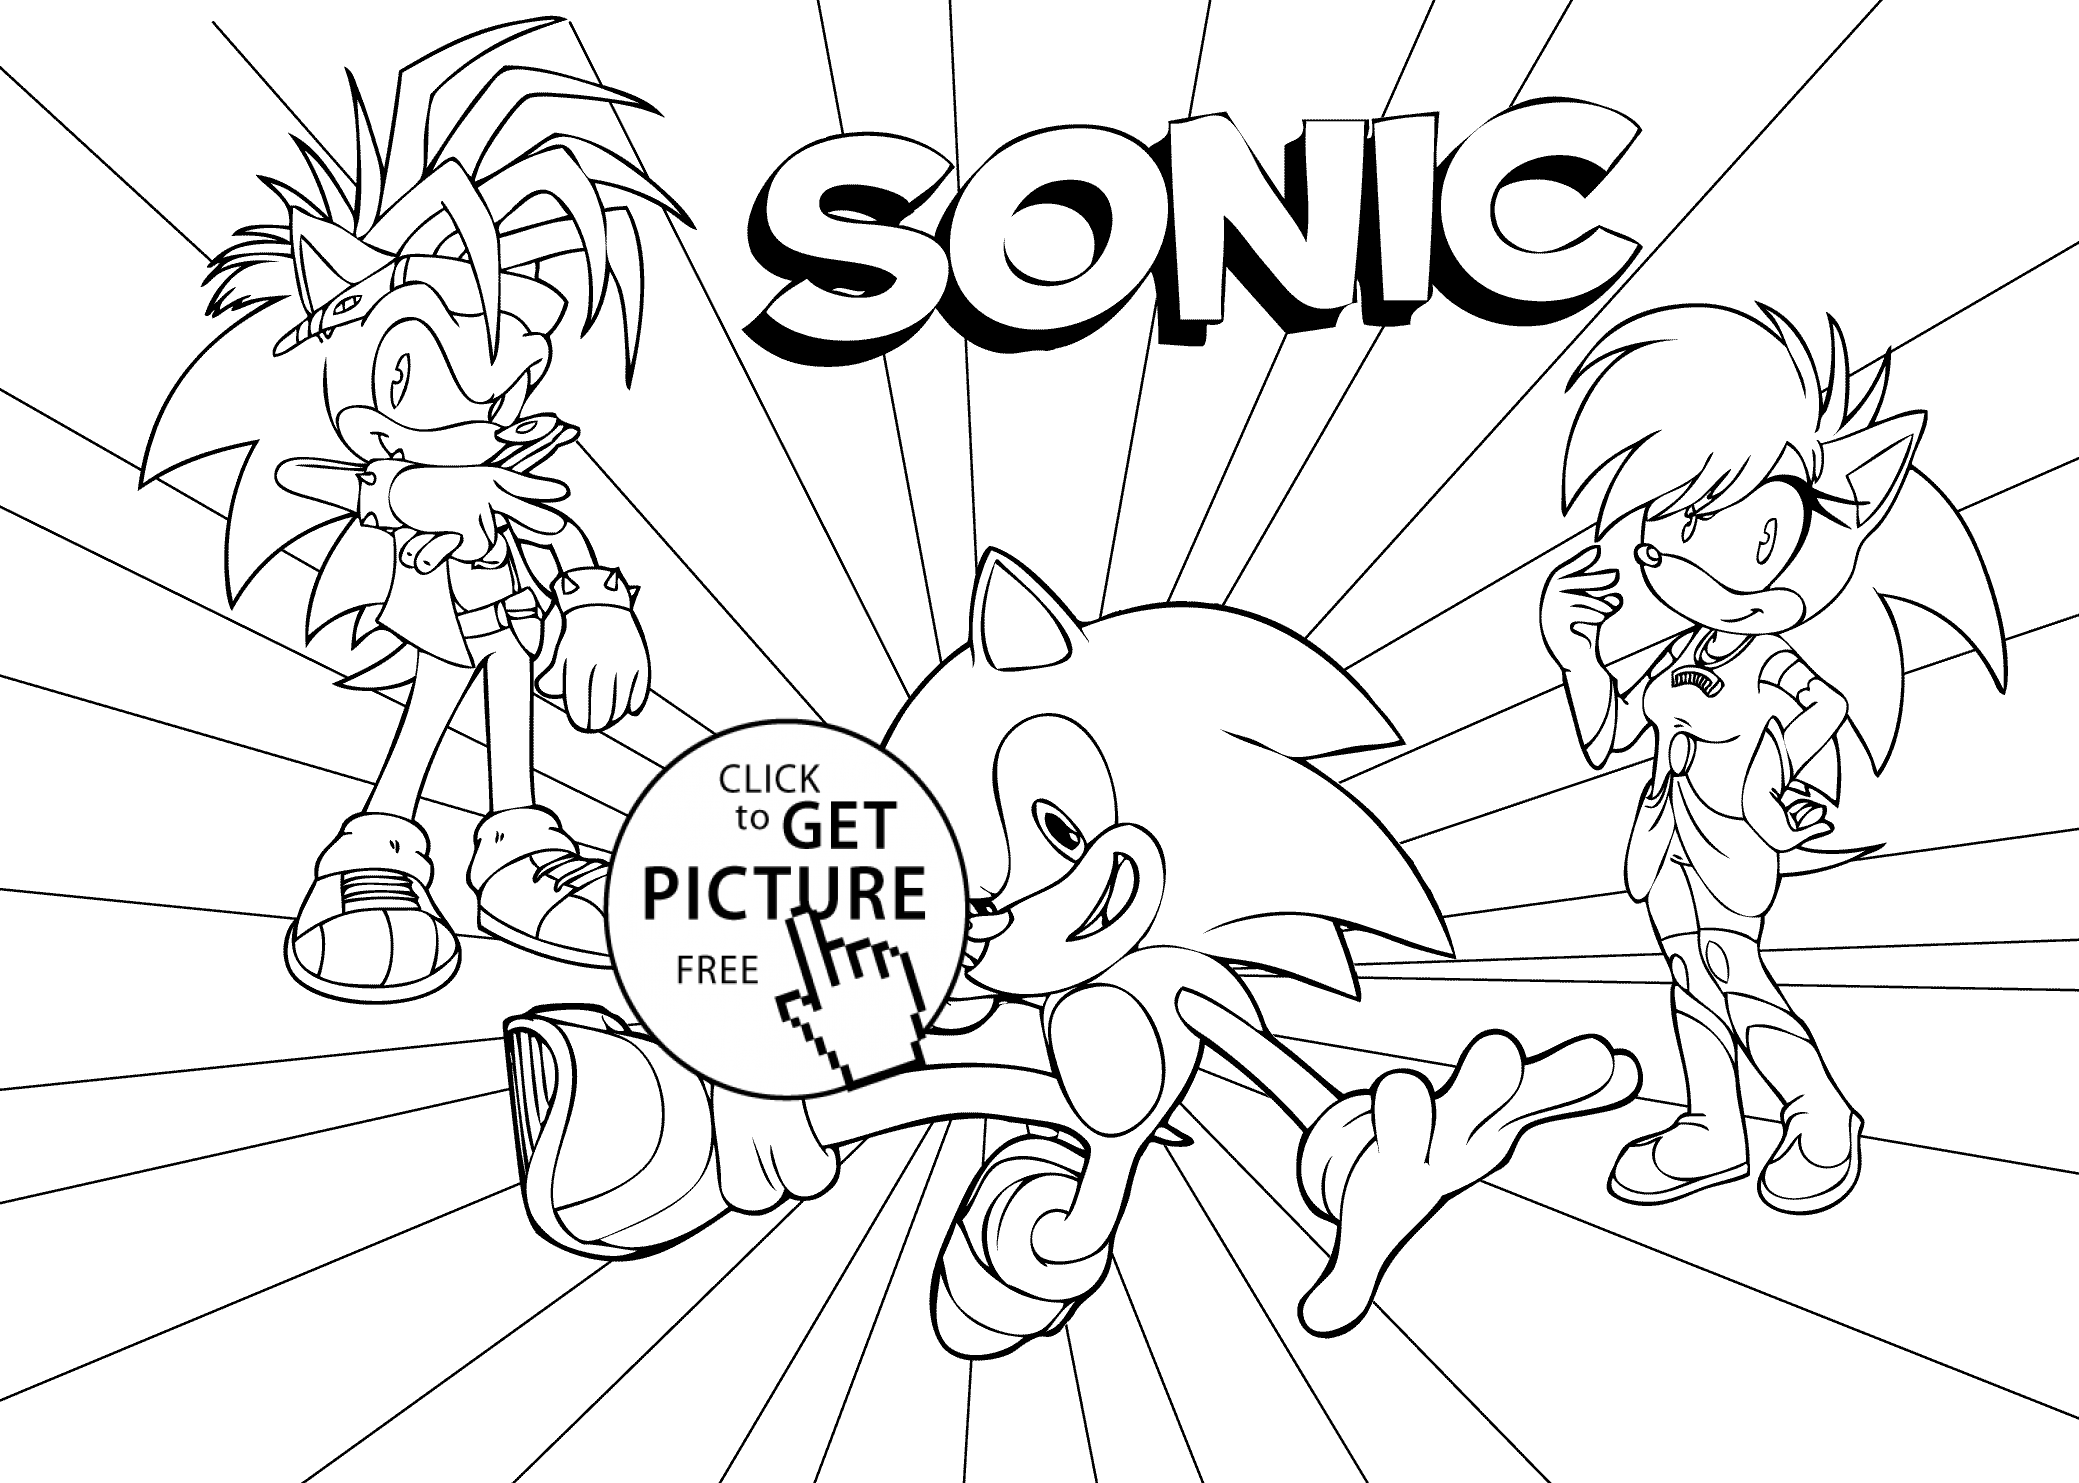 Sonic coloring pages for kids free printable | coloing-4kids.com